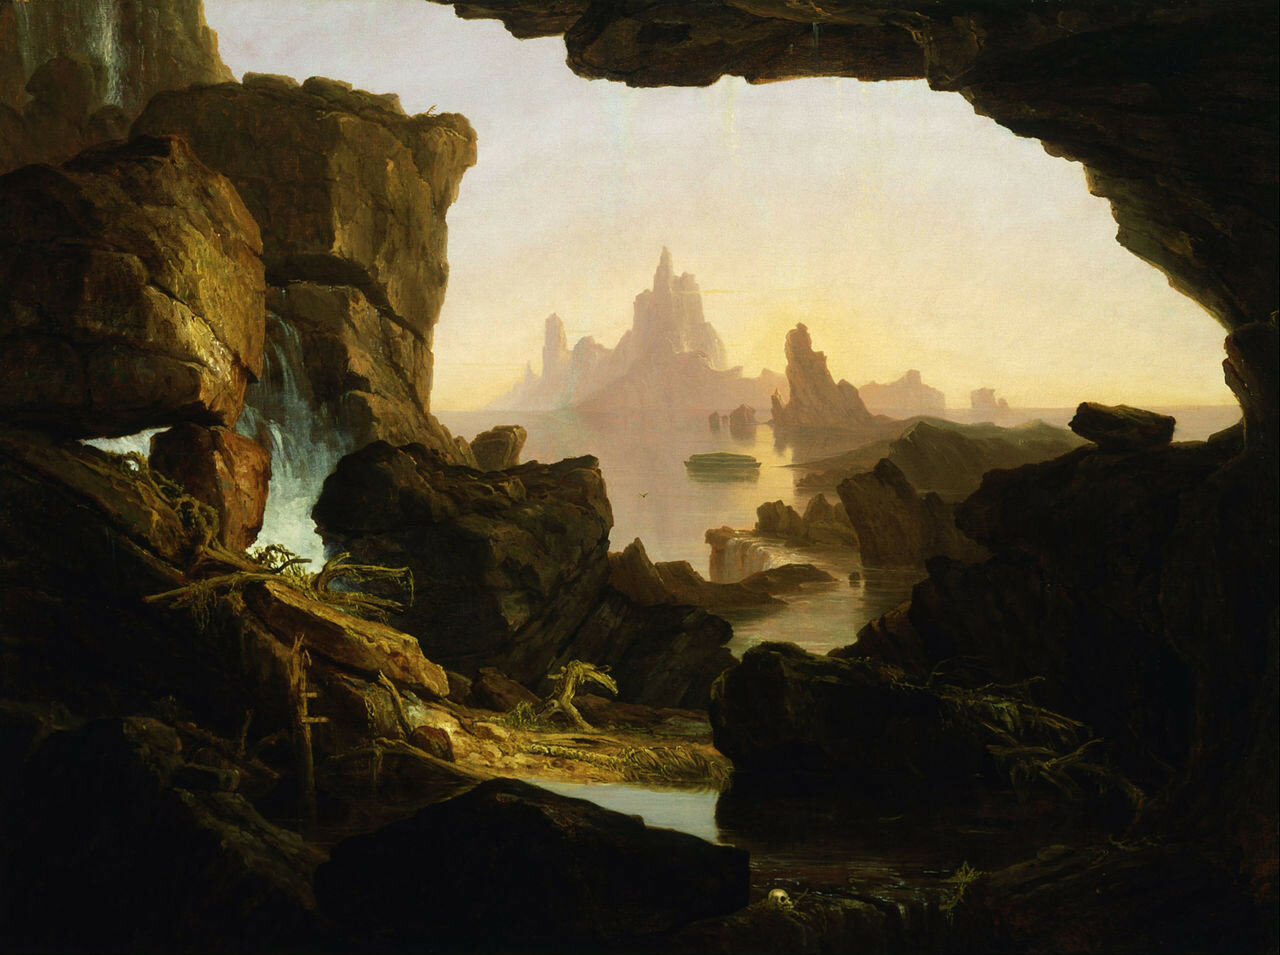 1280px-Thomas_Cole_-_The_Subsiding_of_the_Waters_of_the_Deluge_-_Google_Art_Project.jpg